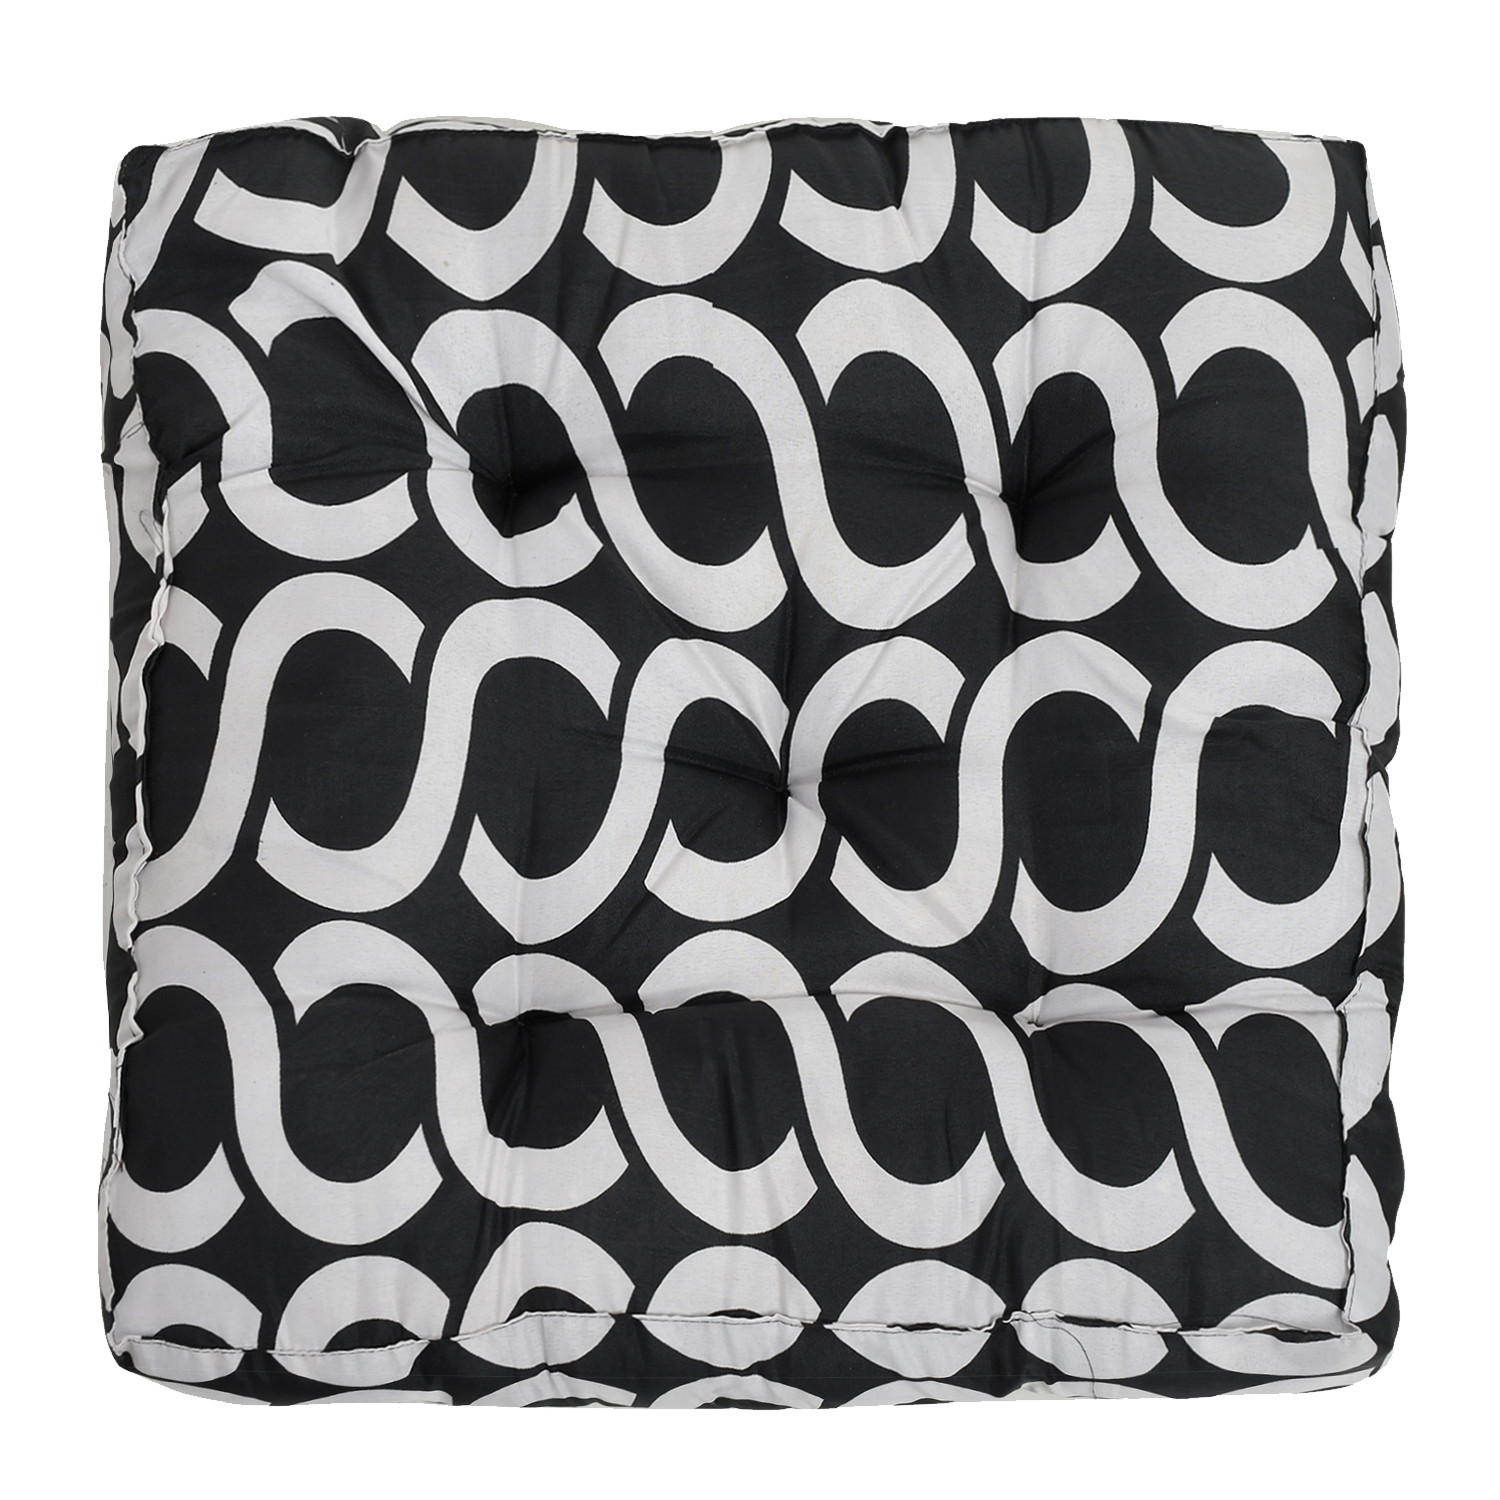 Kuber Industries Geometric Seamless Pattern Microfiber Square Chair Pad Seat Cushion For Rocking chair, Office chair, Dinning chair, Indoor/Outdoor, 18*18 Inch (Black)